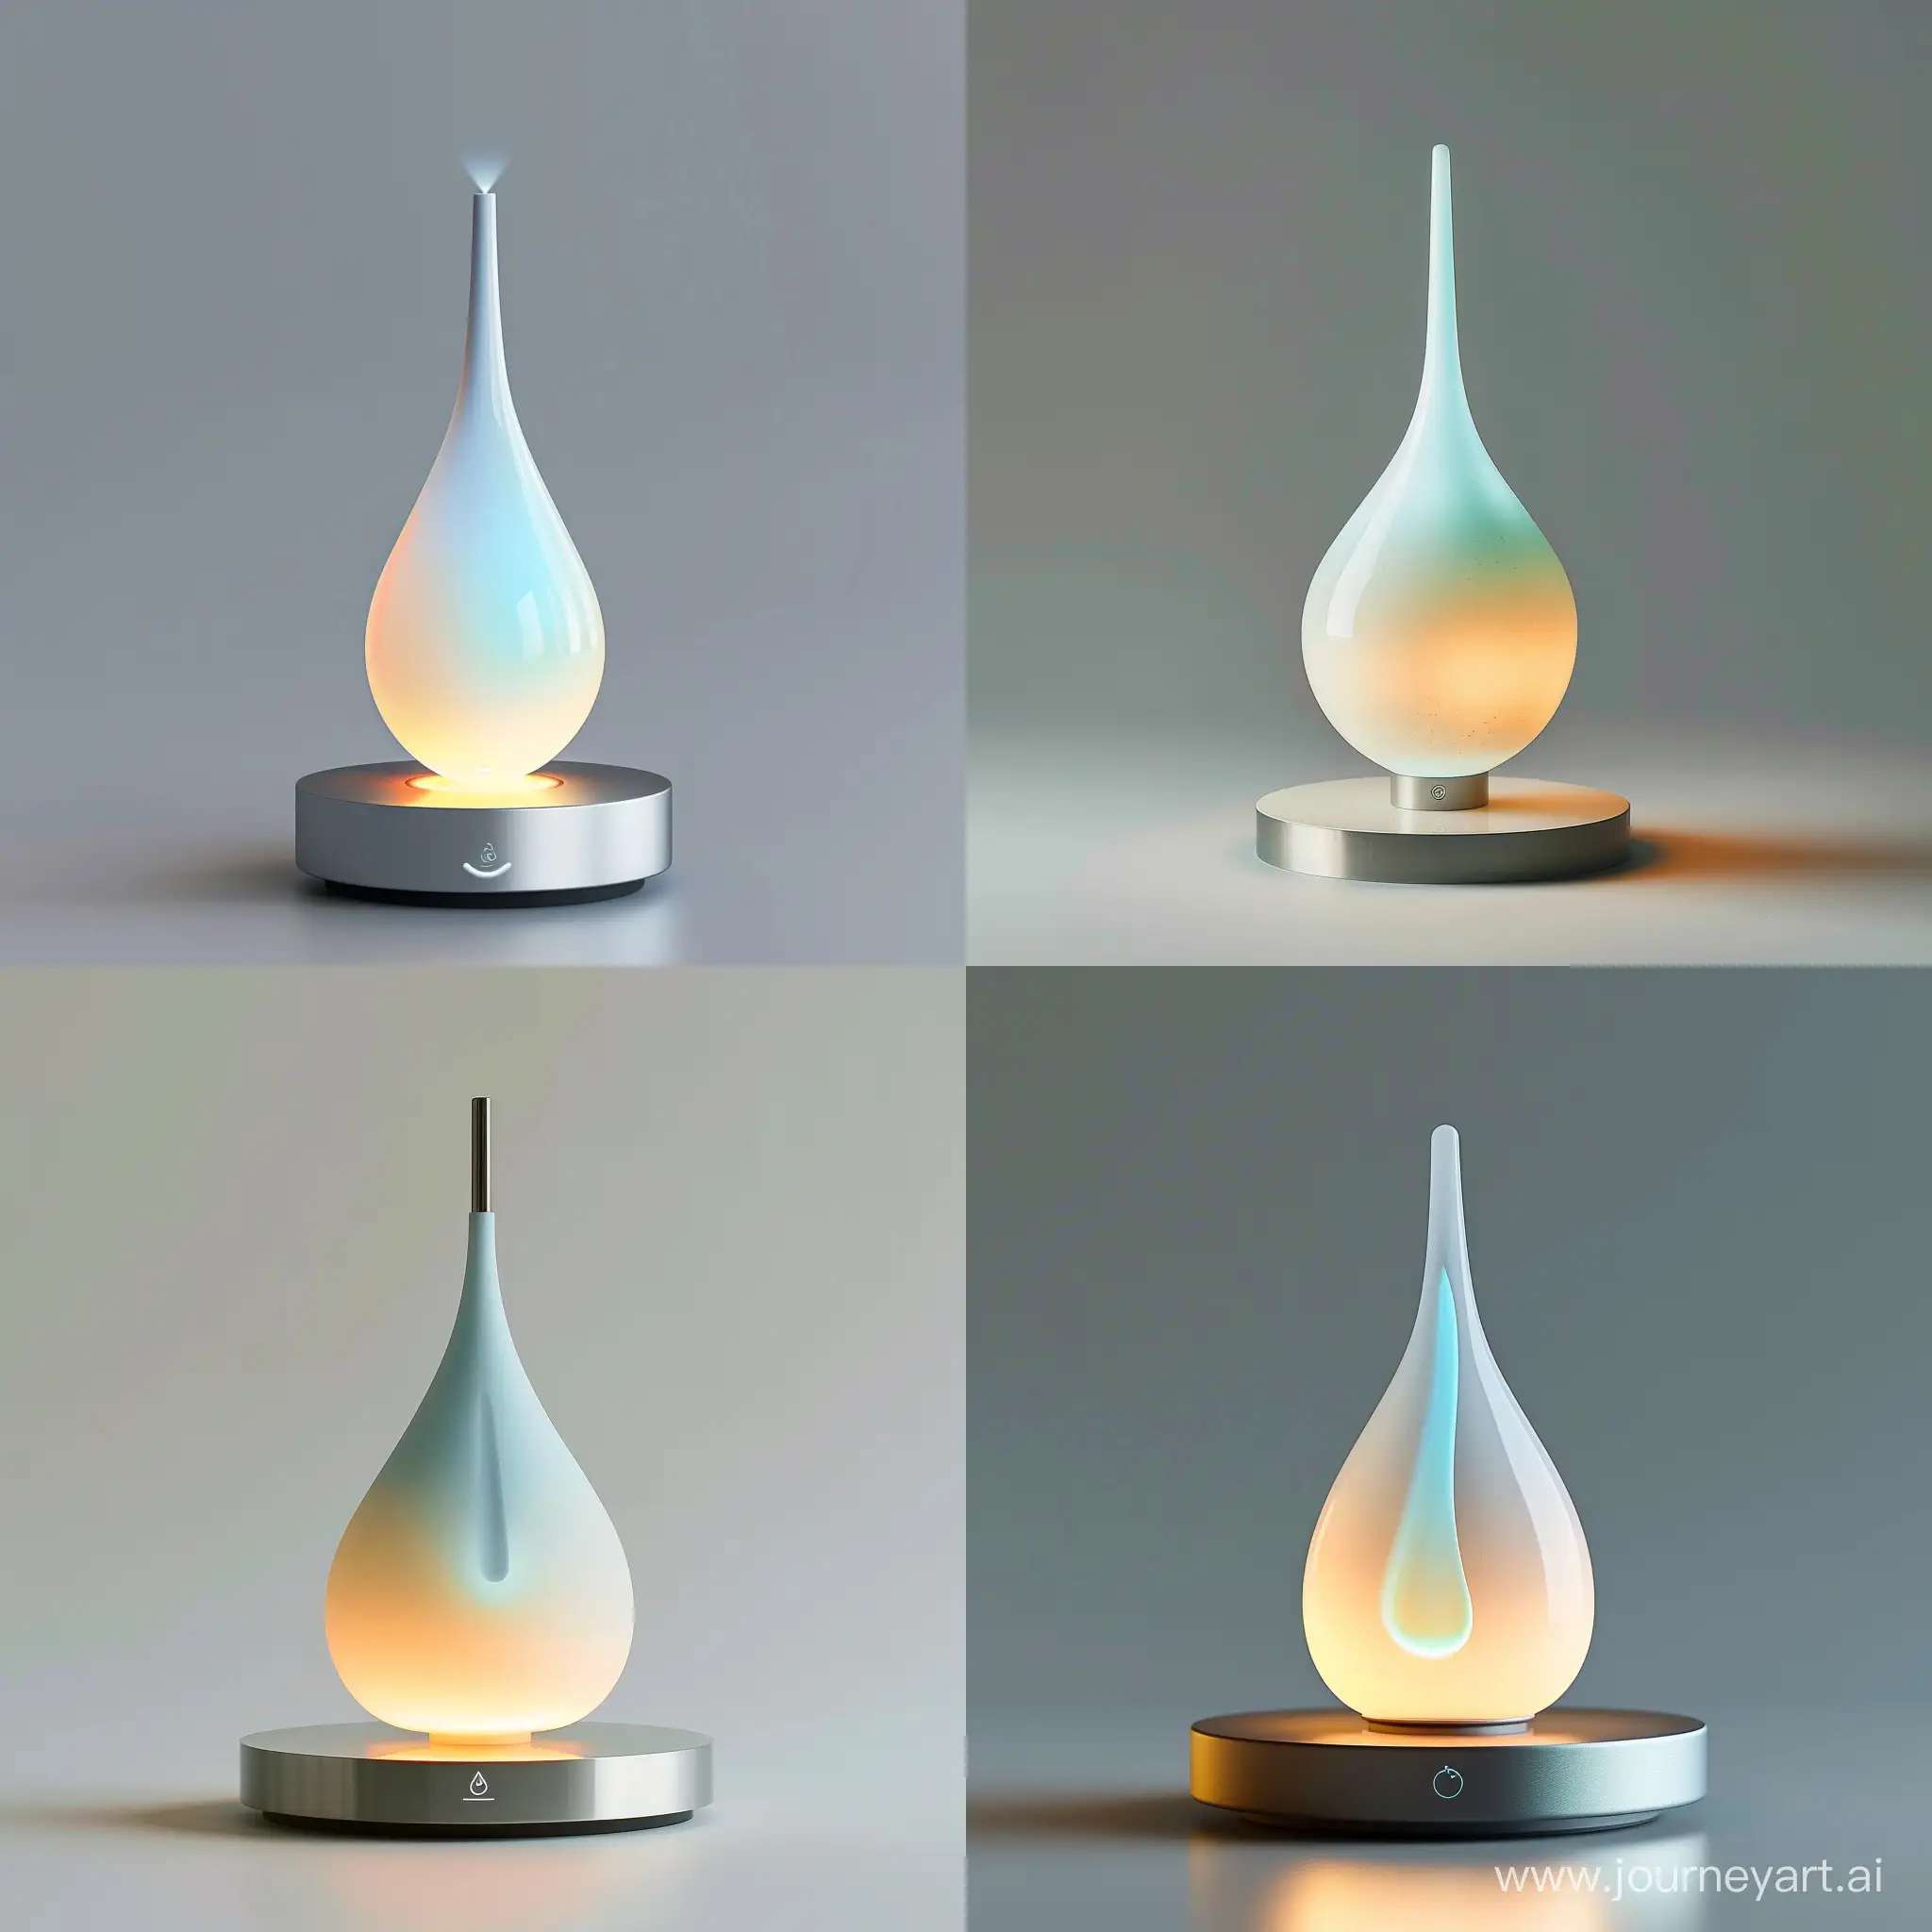 Imagine a single, slender teardrop crafted from luminous ceramic, resting gracefully on a minimal base of recycled aluminum.This is The Zephyr, a captivating device that promotes sustainable energy use in your smart home.
Focus on capturing the essence of The Zephyr:
Minimalist design: Sleek, elegant, and unobtrusive.
Sustainable materials:Luminous ceramic teardrop and recycled aluminum base.Dynamic light display: Soft, calming blues and greens for efficient energy use, shifting to warmer tones as consumption increases.
Additional details:The teardrop form should be smooth and polished, with a slight translucency to allow the internal light to shine through.The base can be circular or rectangular, with a clean and modern aesthetic.Consider incorporating a subtle logo on the base,depicting a minimalist symbol representing energy or sustainability.
Style:Modern, minimalist, and nature-inspired.
Mood:Serene, calming, and inviting.
Inspiration:Award-winning designs like the iF Design Award-winning "Willow Lamp" and the Red Dot Award-winning "Leaf Personal Air Purifier."realistic style